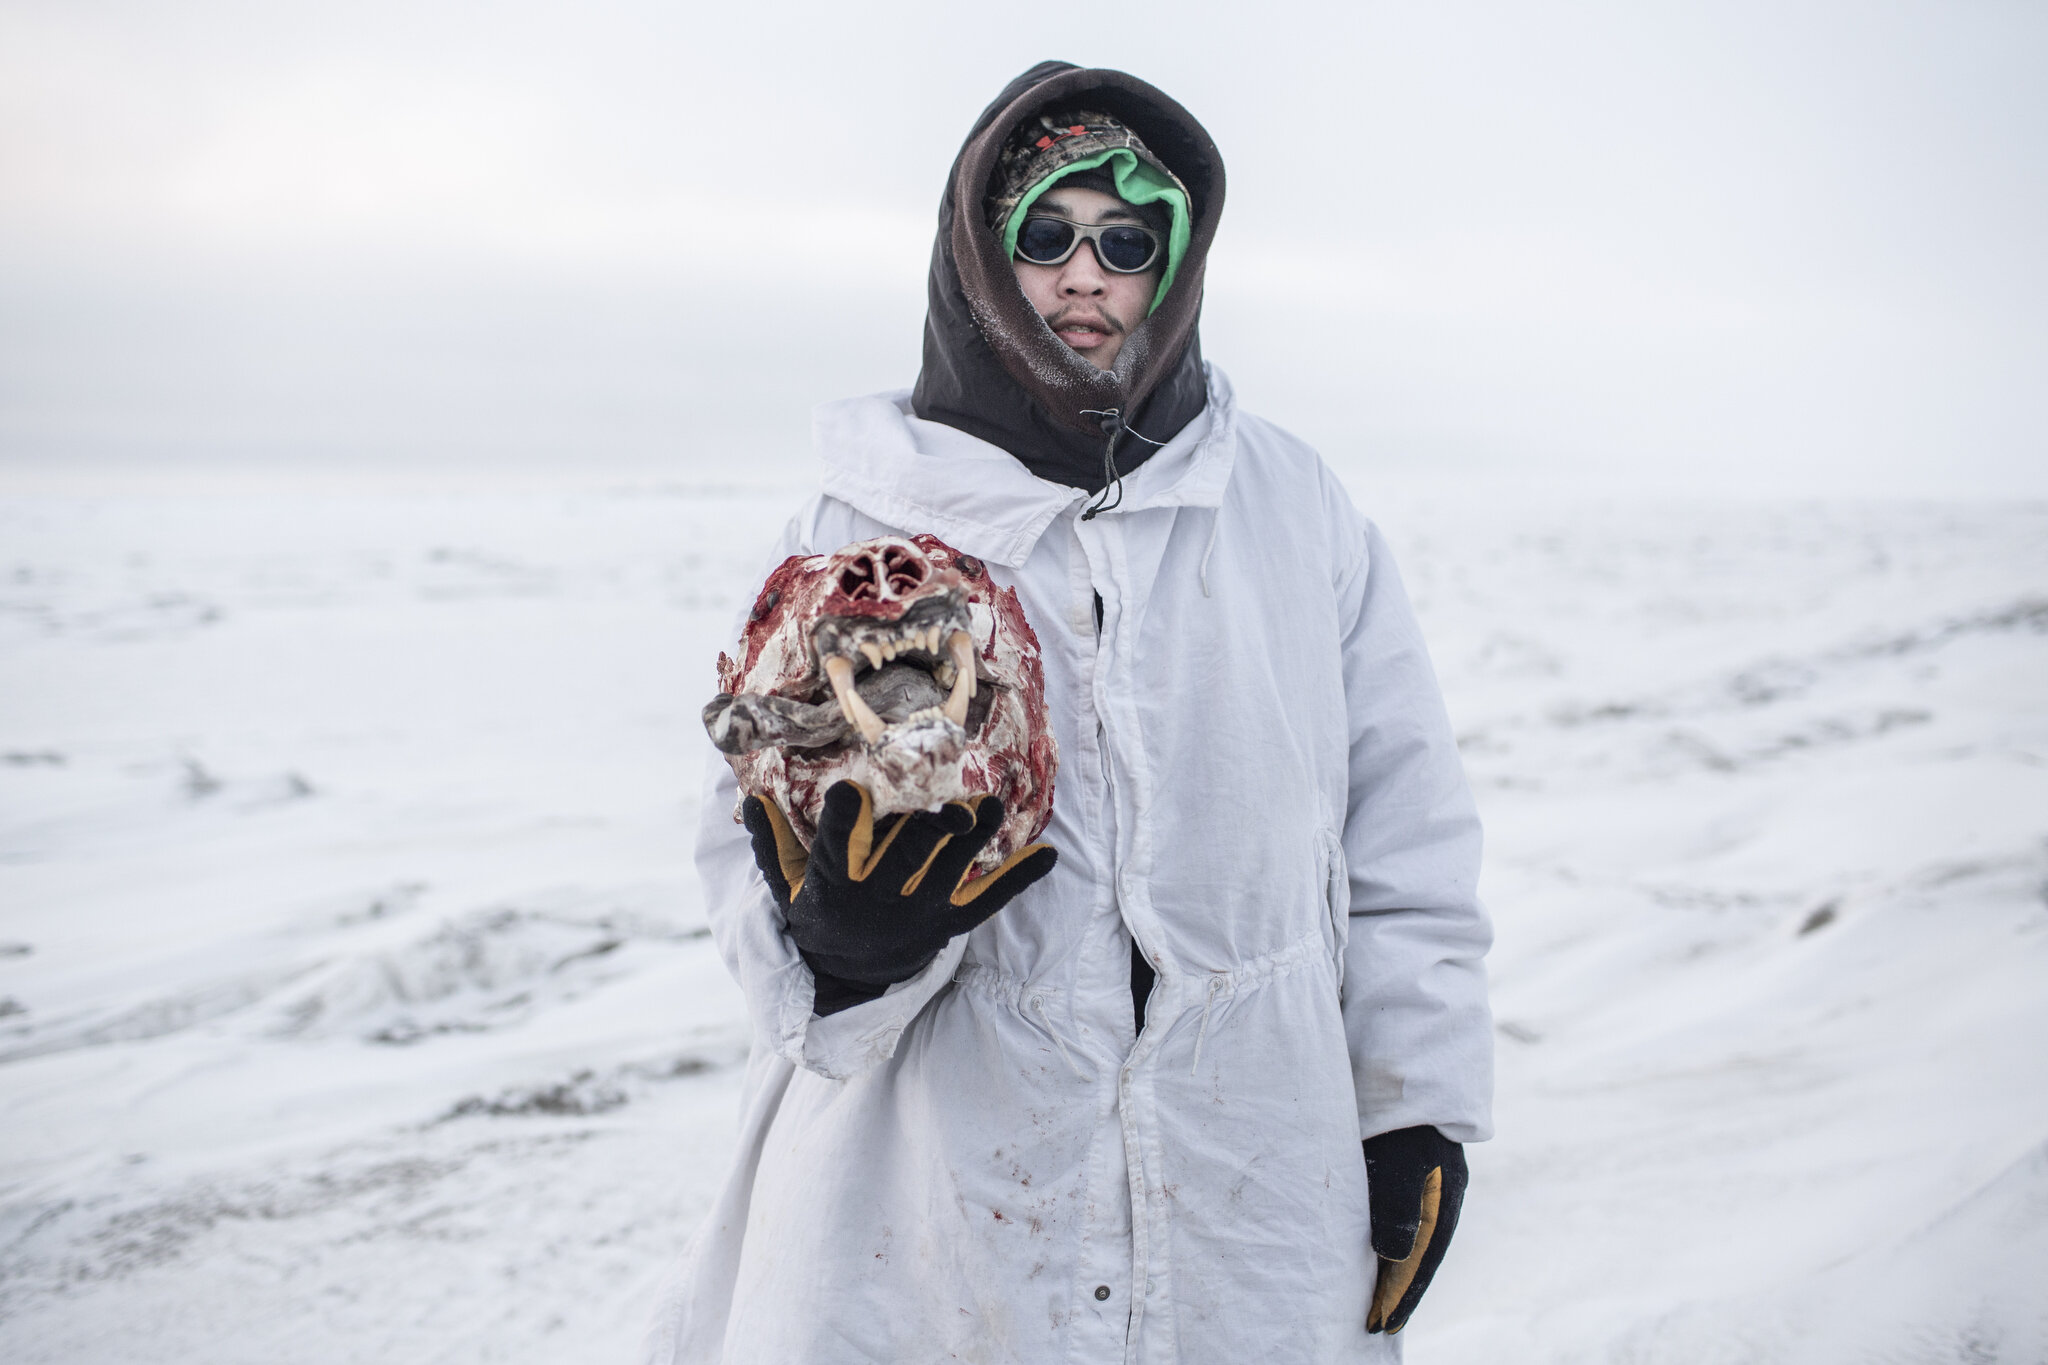  Nelson Nayokpuk of the Herman Ahsuak whaling crew in Utqiagvik, Alaska holds a polar bear skull they shot and killed the day before when it tried to eat their seal skin canoe. April 19th, 2016. Polar bears have grown increasingly hungry as melting s